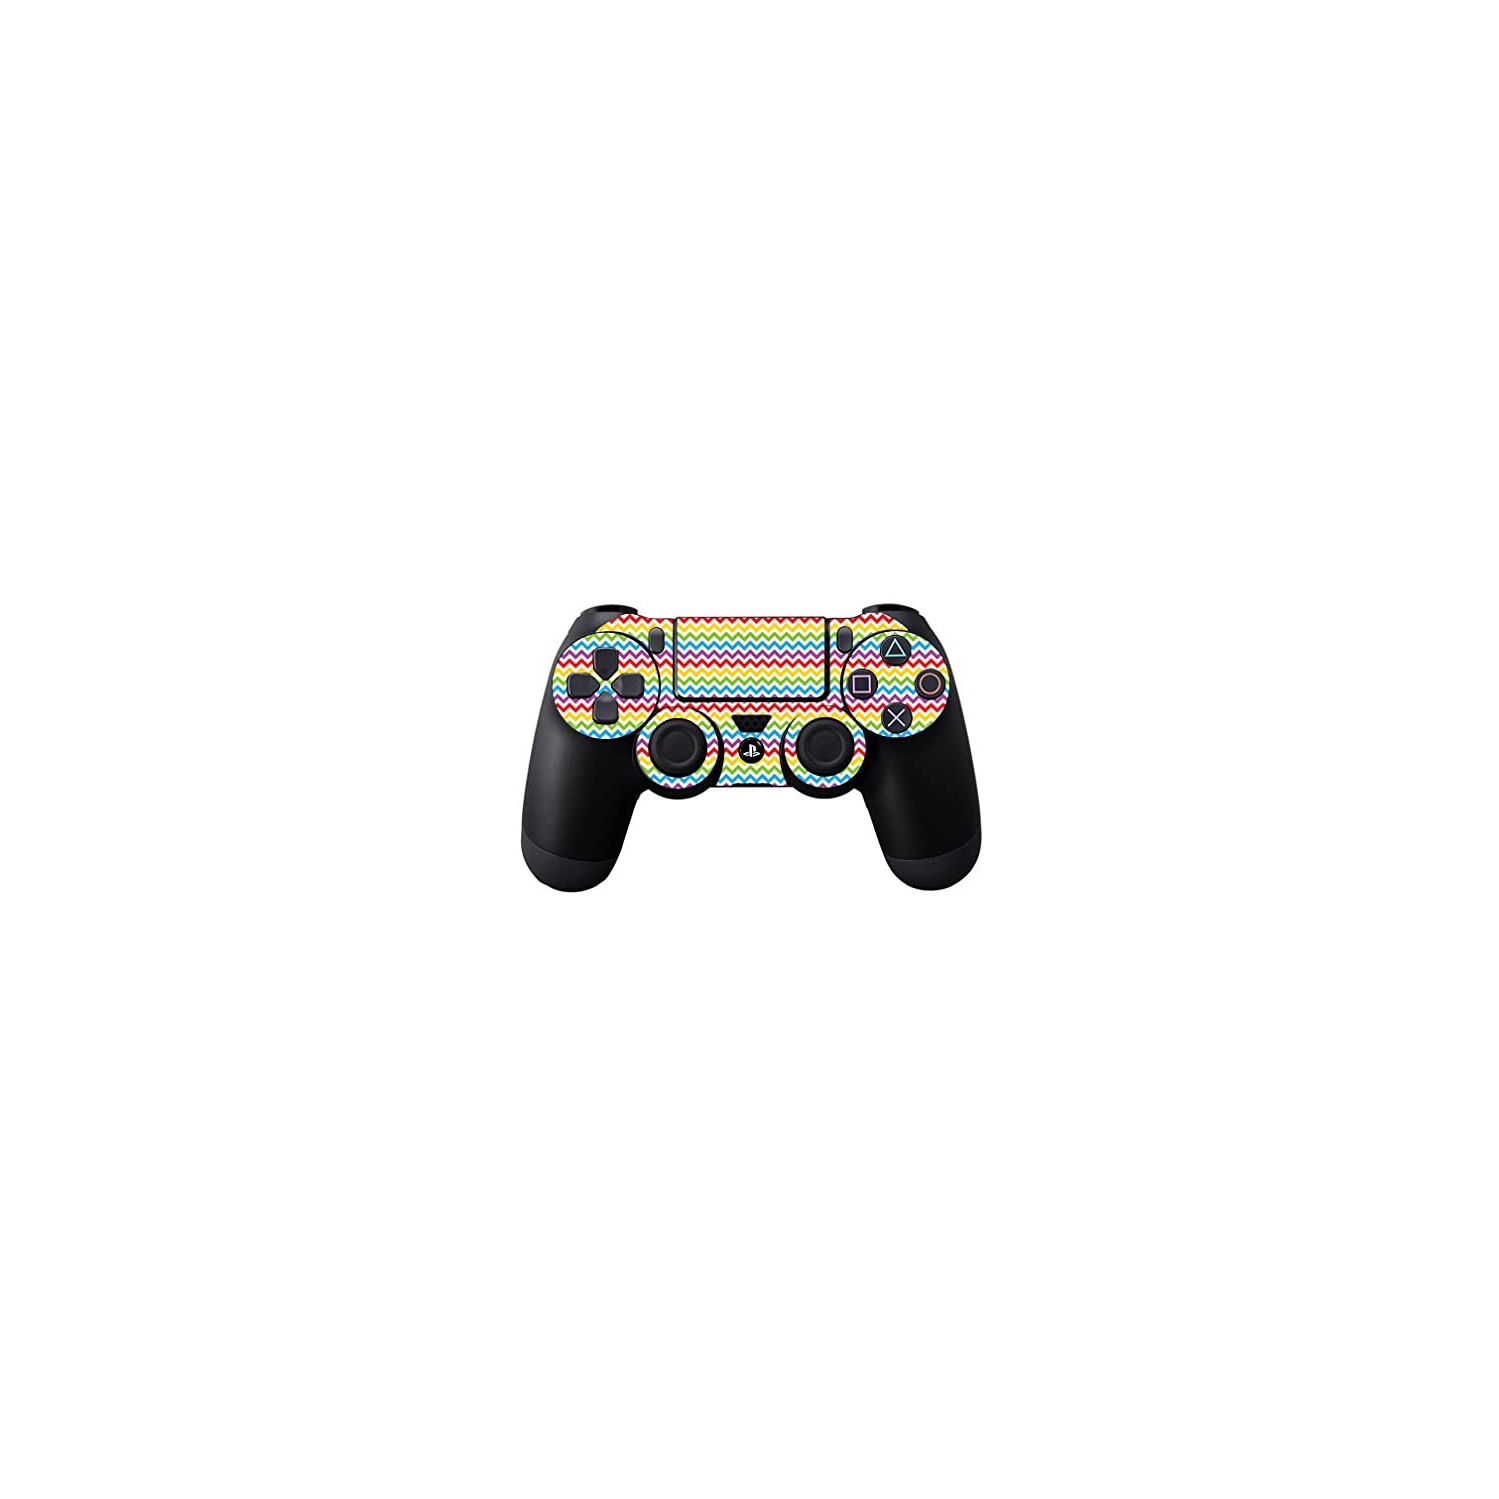 MightySkins Skin Compatible With Sony PlayStation DualShock 4 Controller wrap sticker skins Candy Chevron